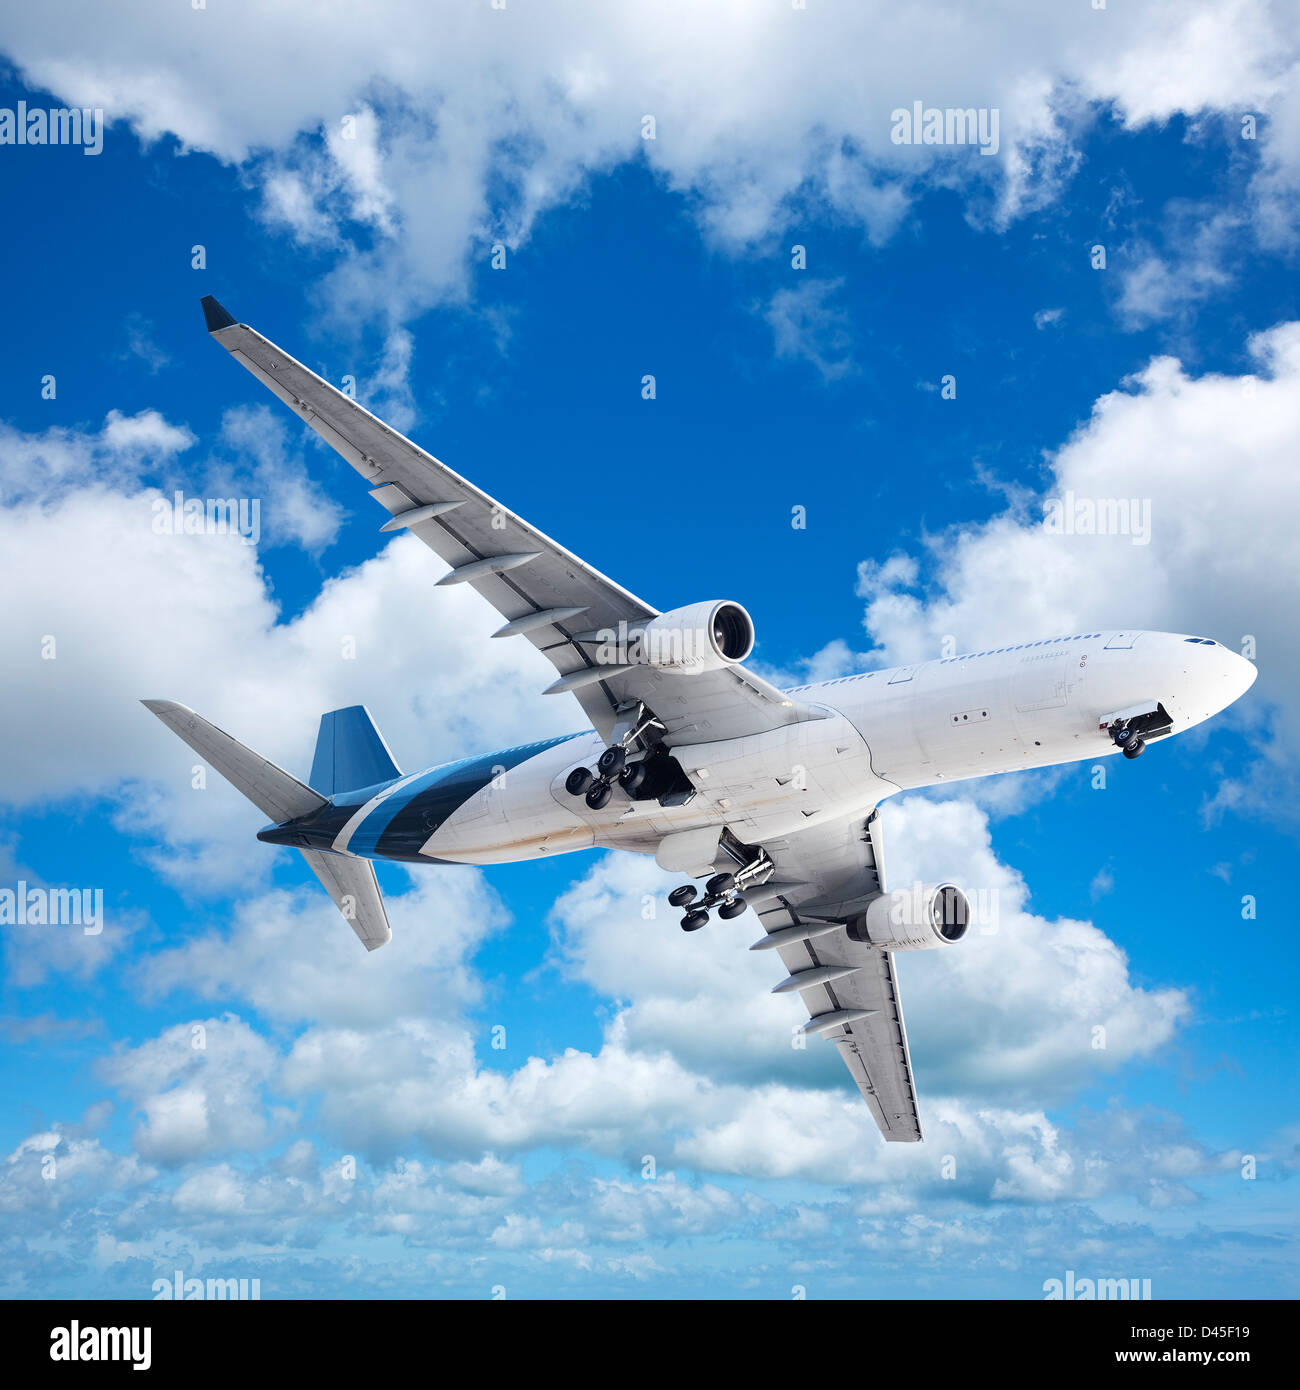 Jet meneuvering in a blue cloudy sky. Square composition. Stock Photo